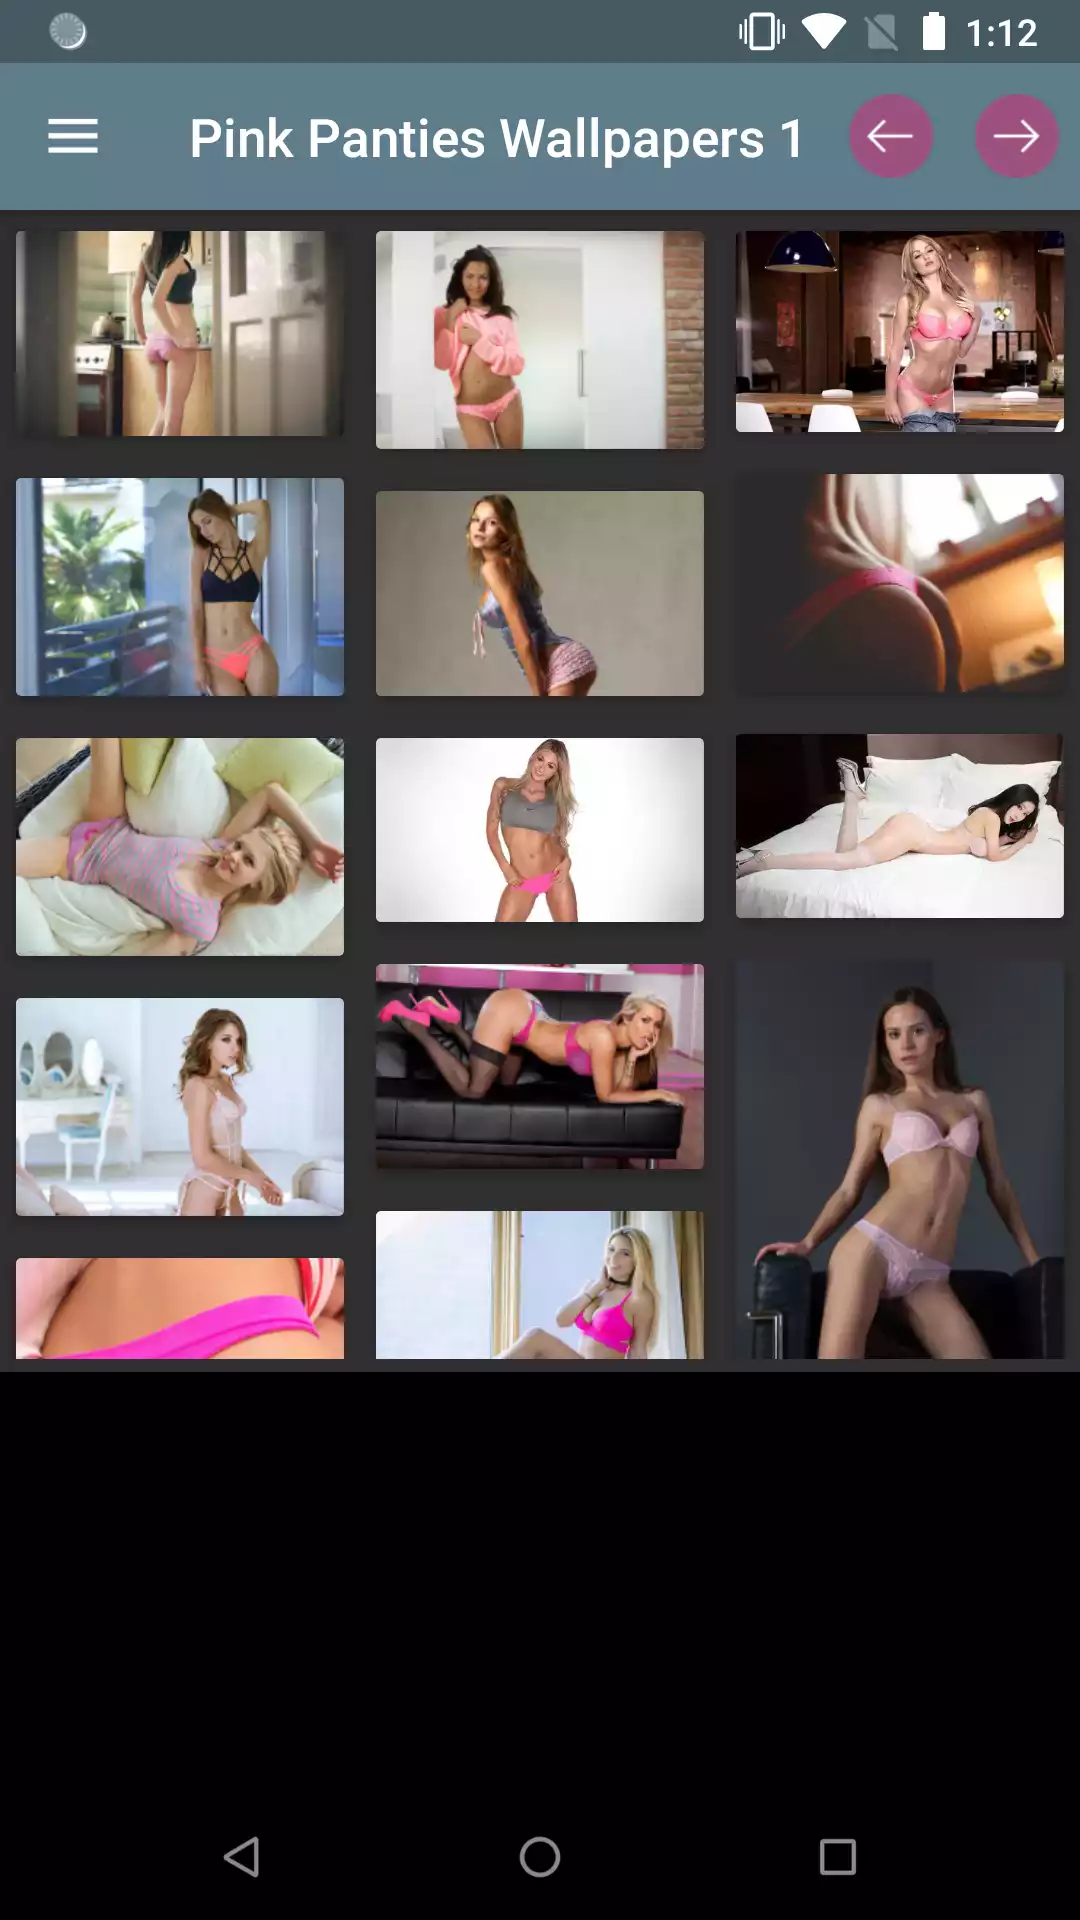 Pink Panties Wallpapers wallpapers,apk,image,pics,panties,hot,pink,apps,android,images,hentie,porn,app,adult,sexy,hentai,finder,hotmilfpics,girls,pic